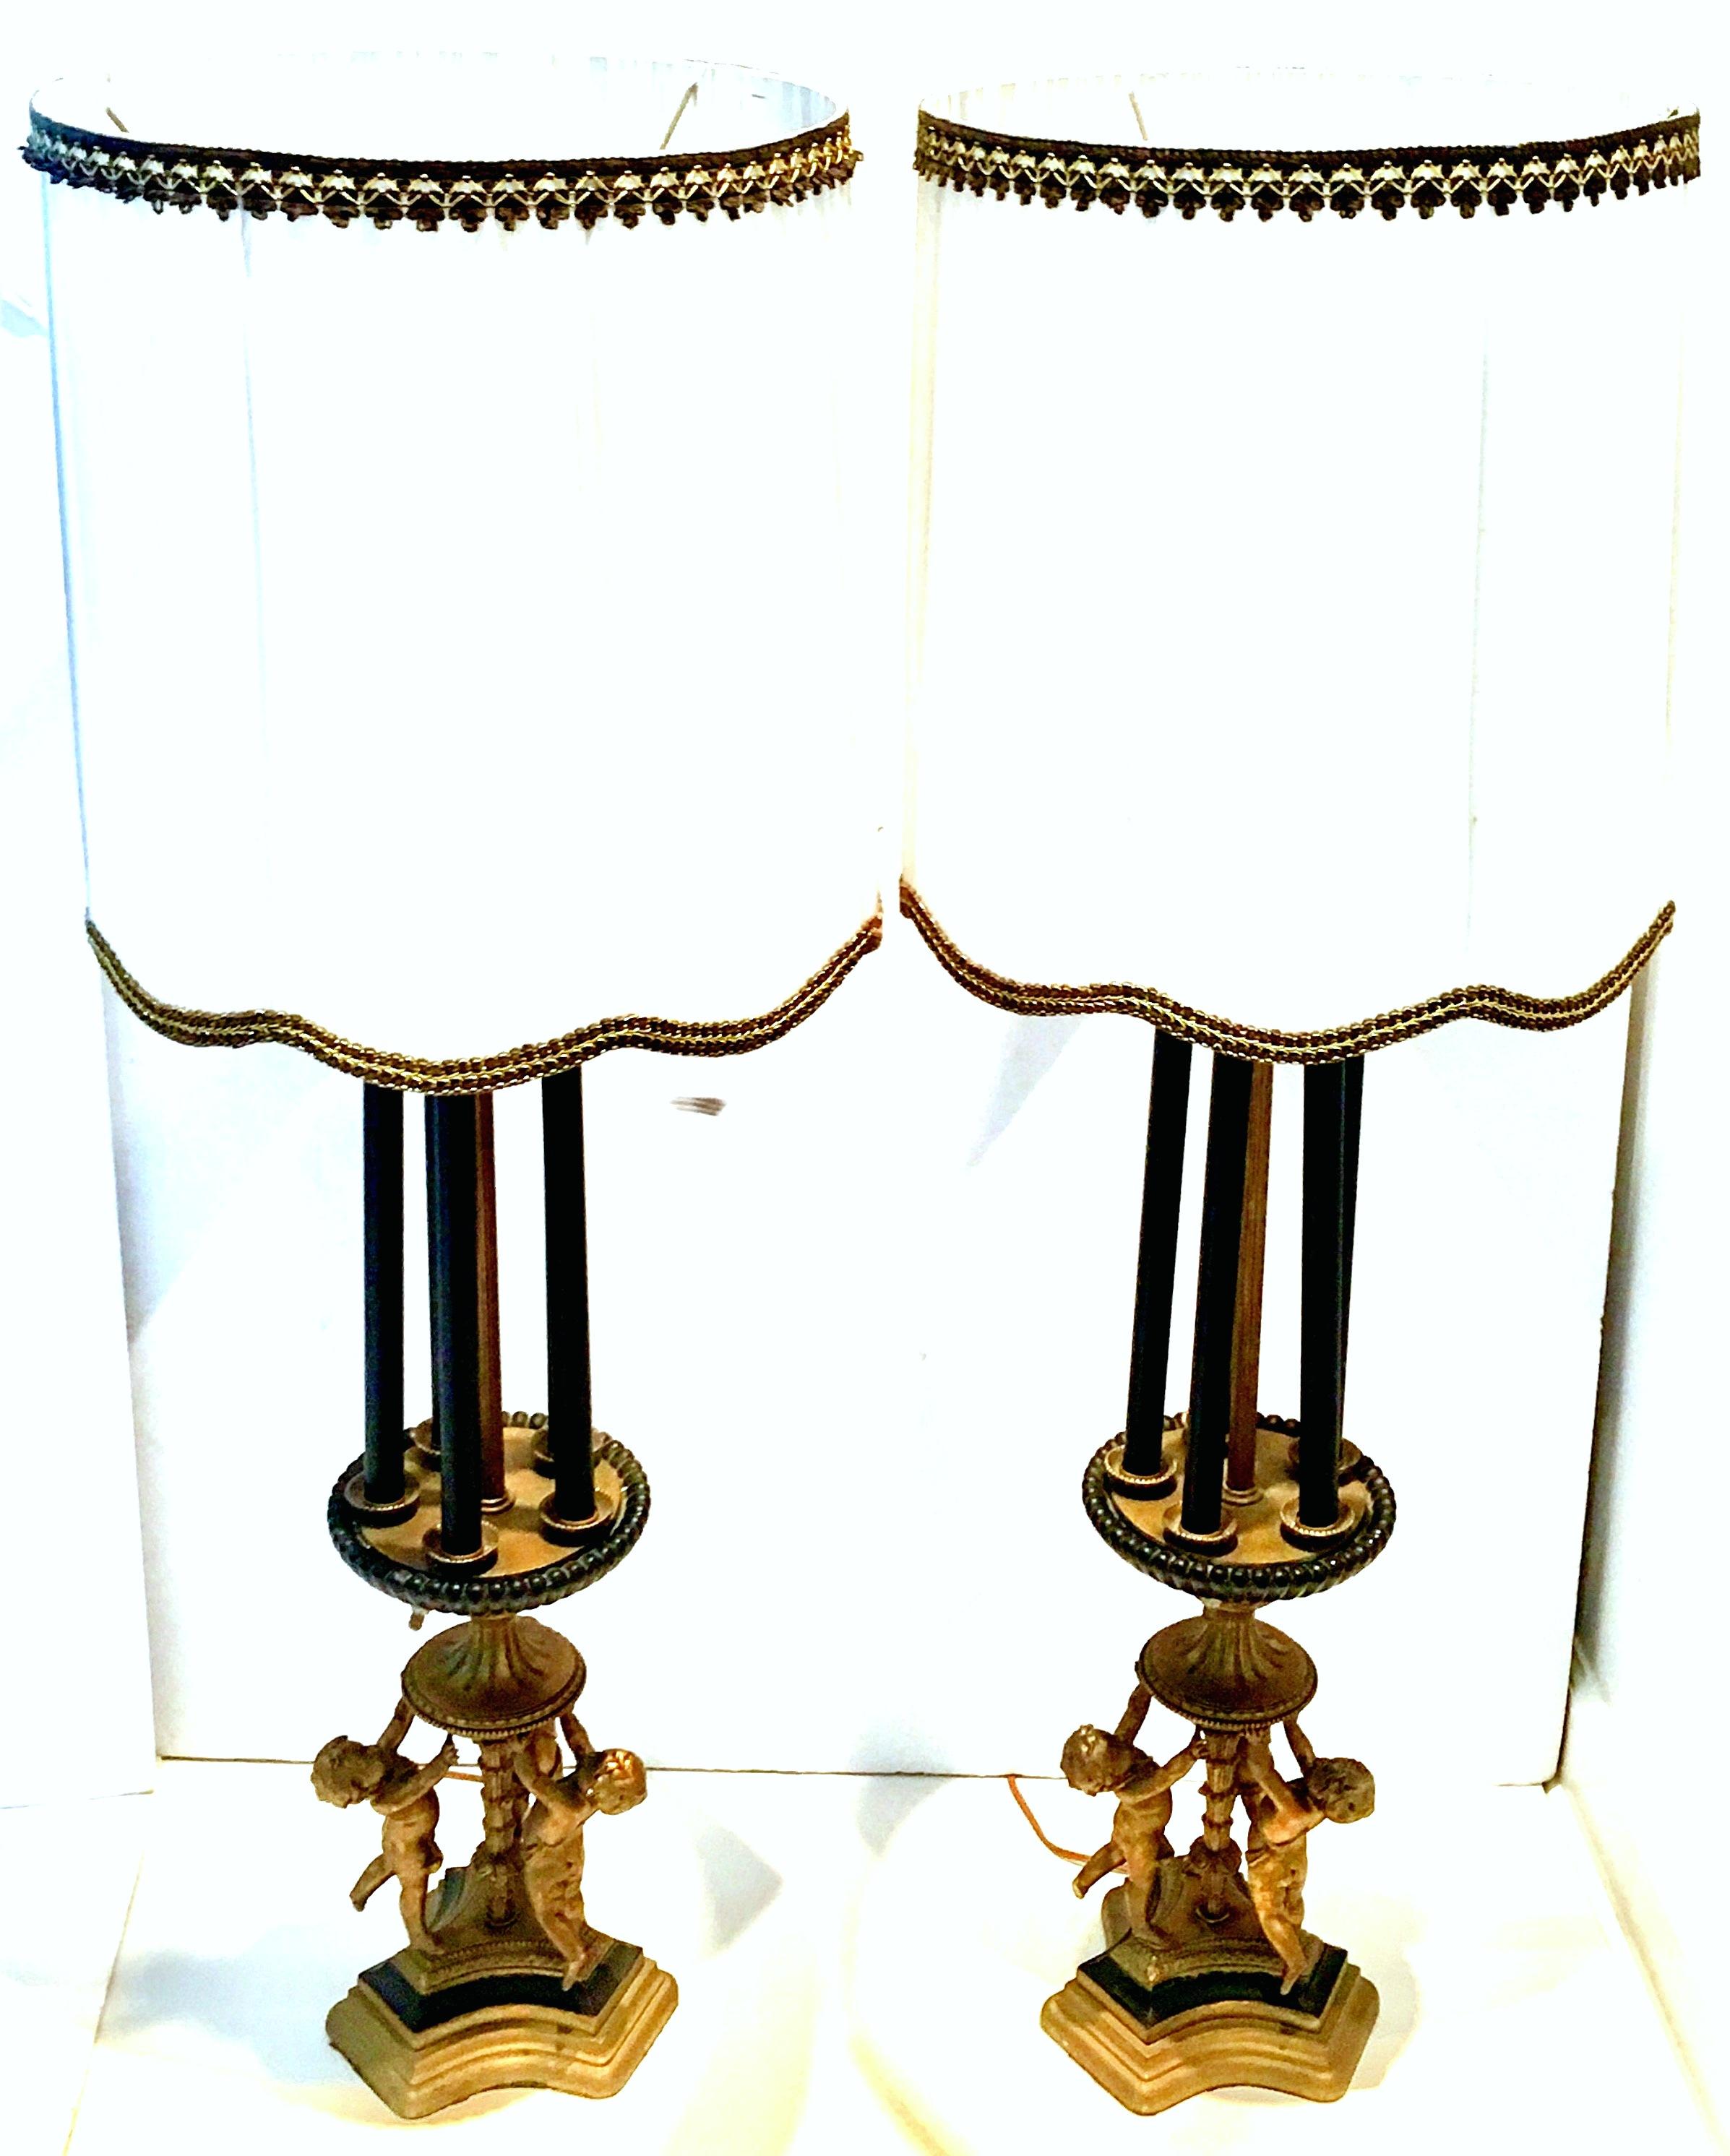 European Antique Monumental Pair Of Neoclassical Six-Light Candelabra Lamps & Shades For Sale